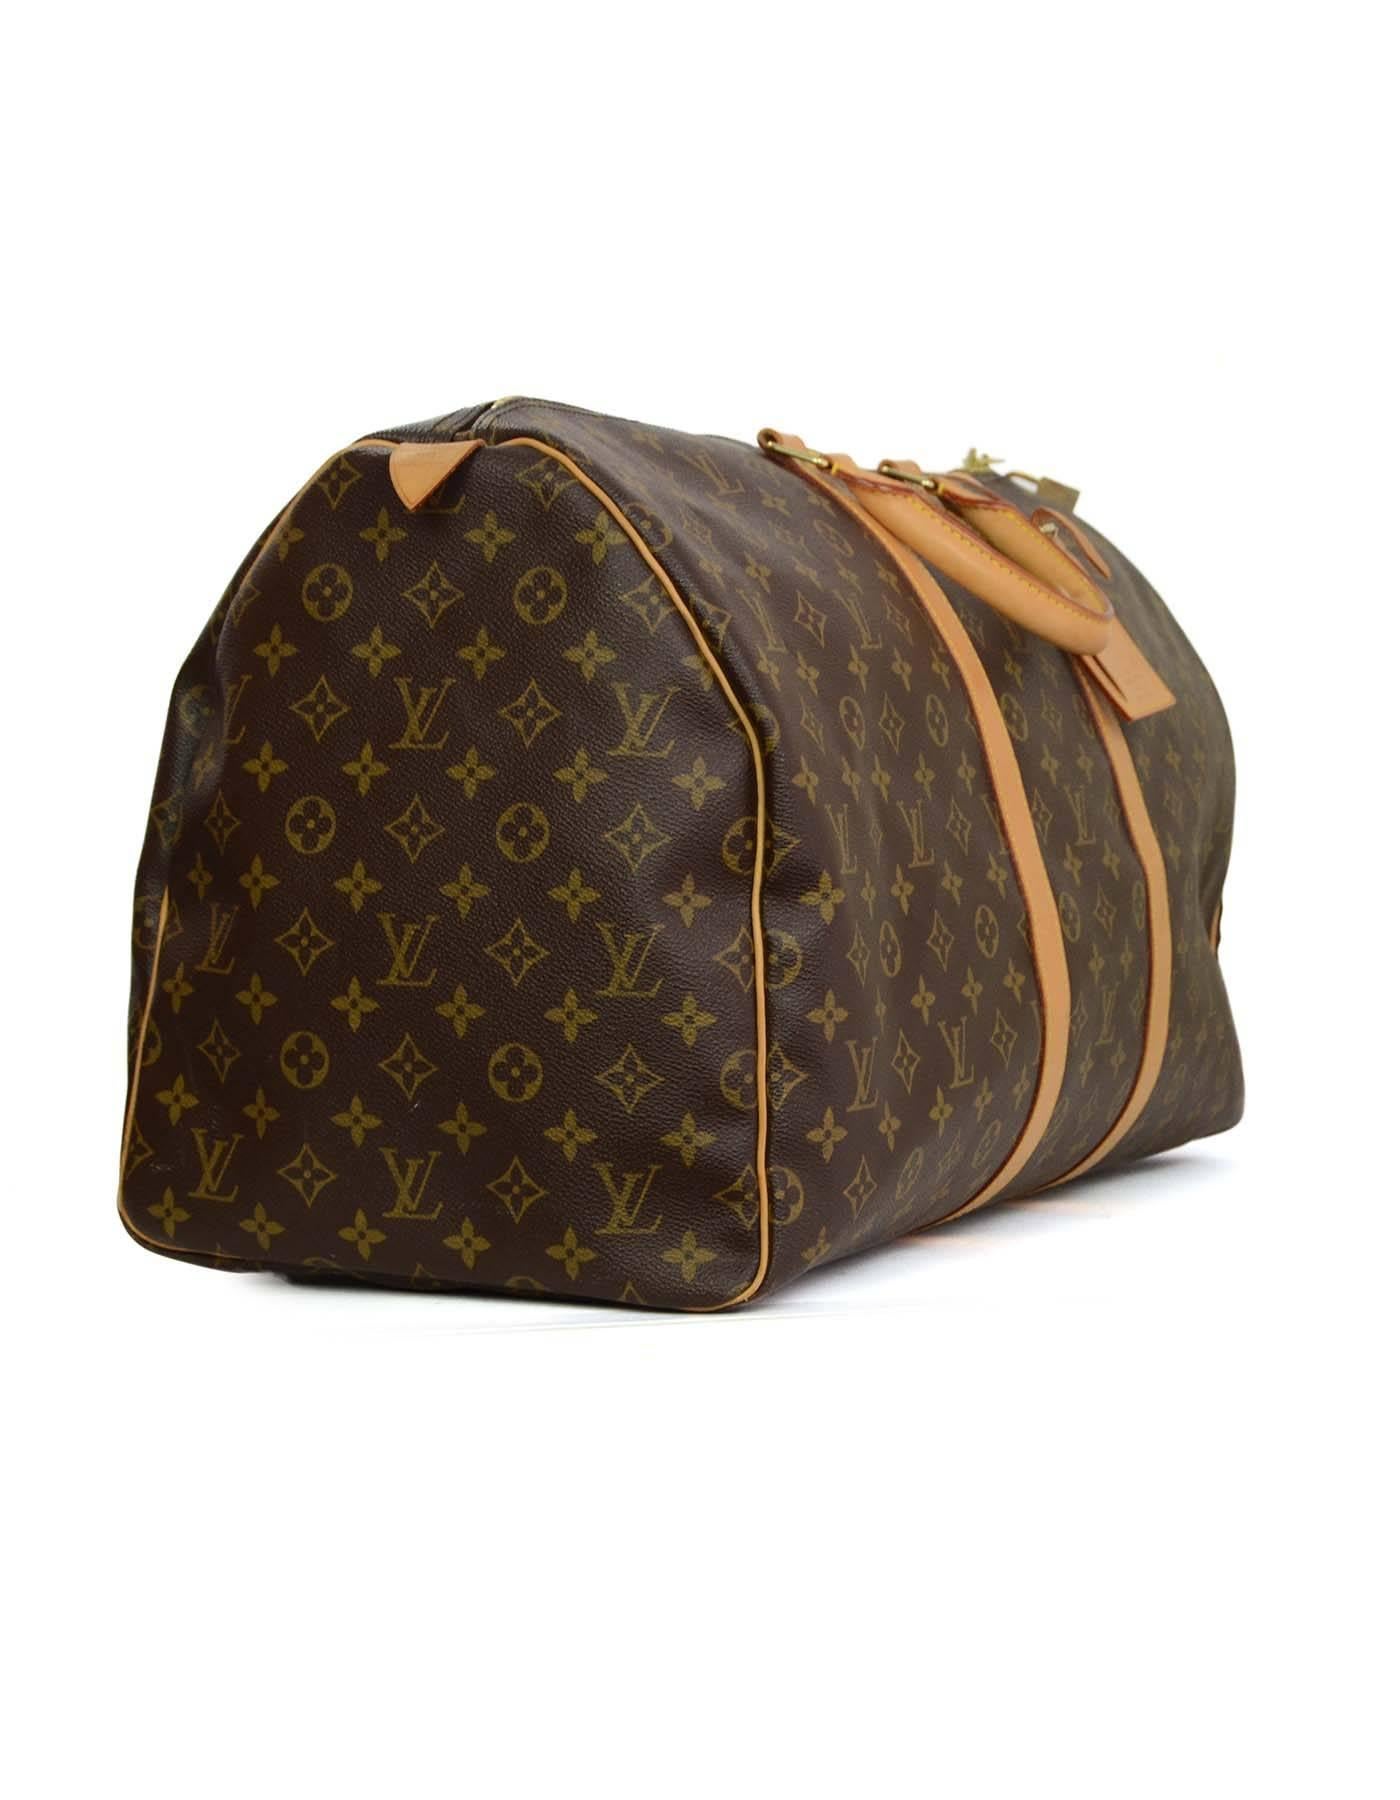 Louis Vuitton Monogram Keepall 55 Luggage
Features leather trim throughout
Made In: USA
Year of Production: 2005
Color: Brown and tan
Hardware: Goldtone
Materials: Coated canvas and leather
Lining: Brown canvas
Closure/Opening: Double zip